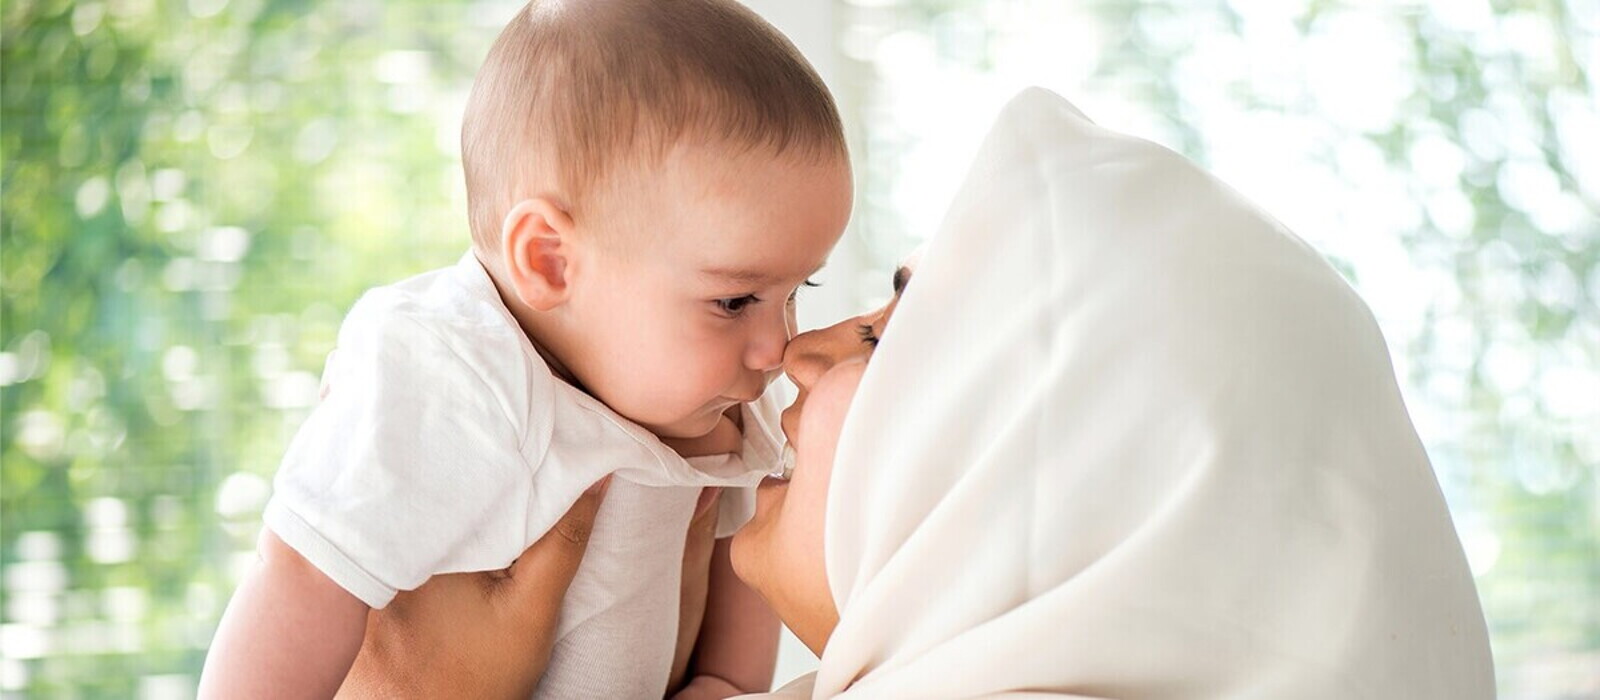 Communicating with your baby